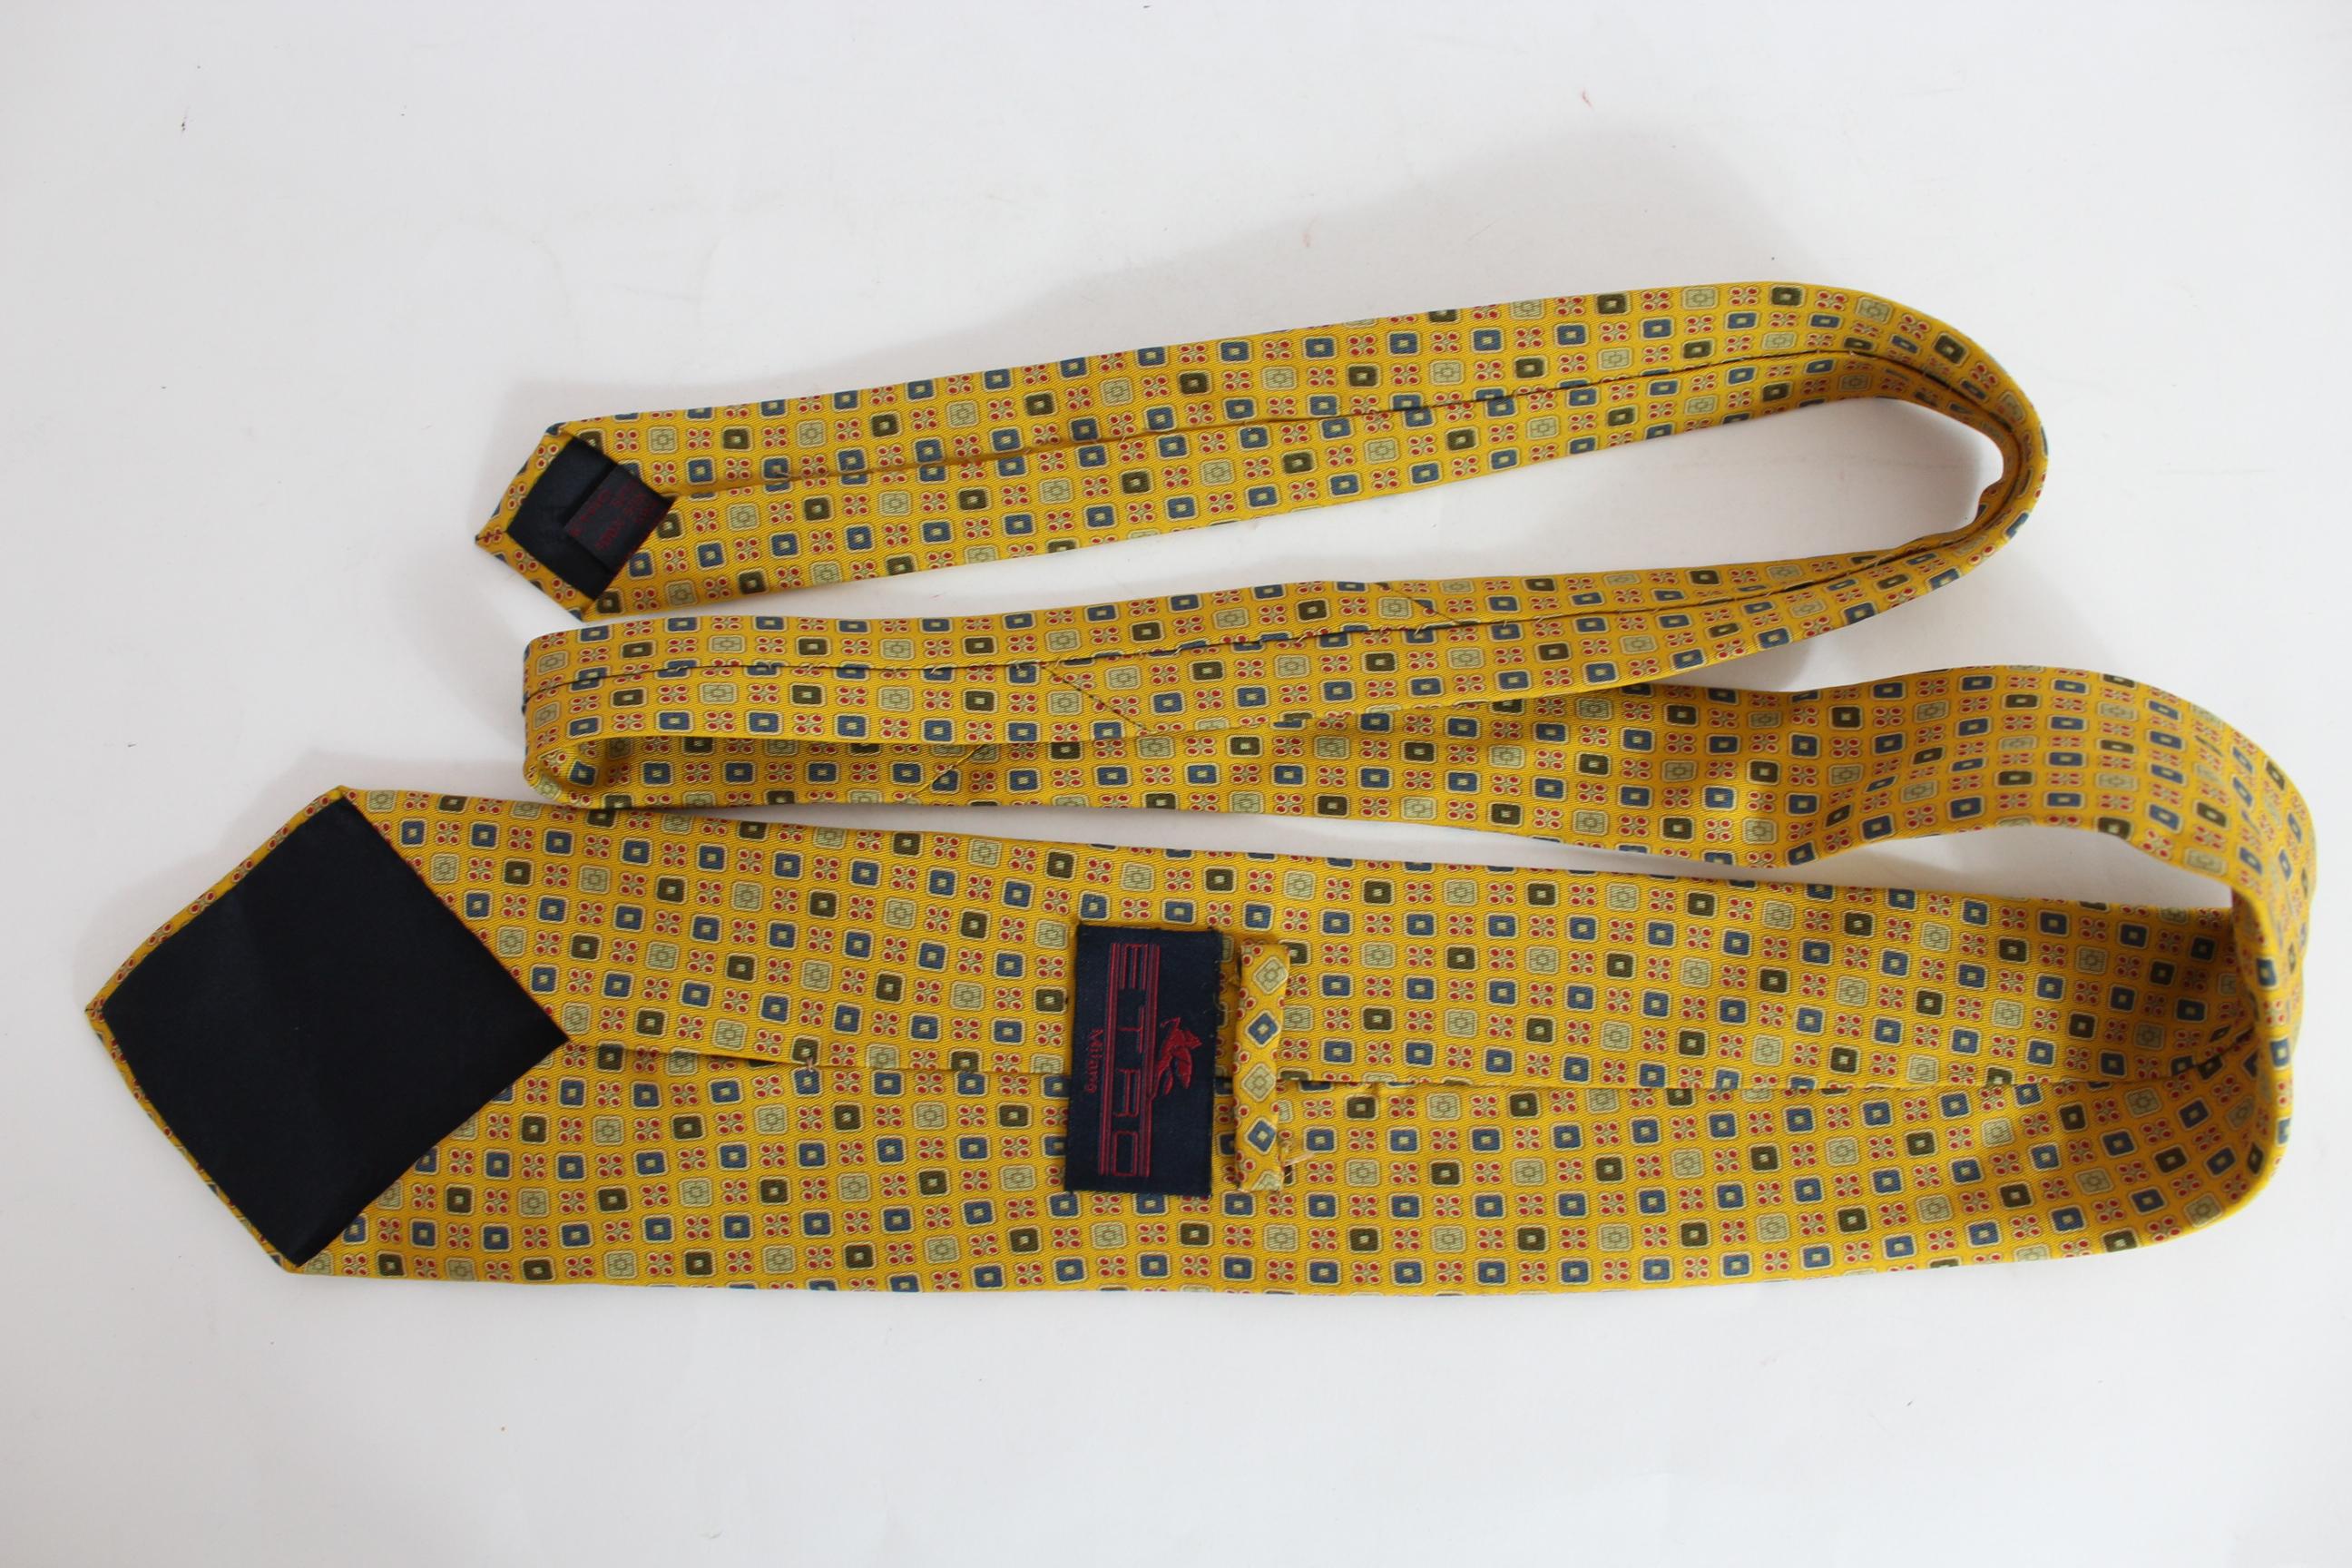 Etro 90s vintage silk yellow tie. Blue and red checked pattern. Made in Italy.

Length: 145 cm
Width: 10 cm
